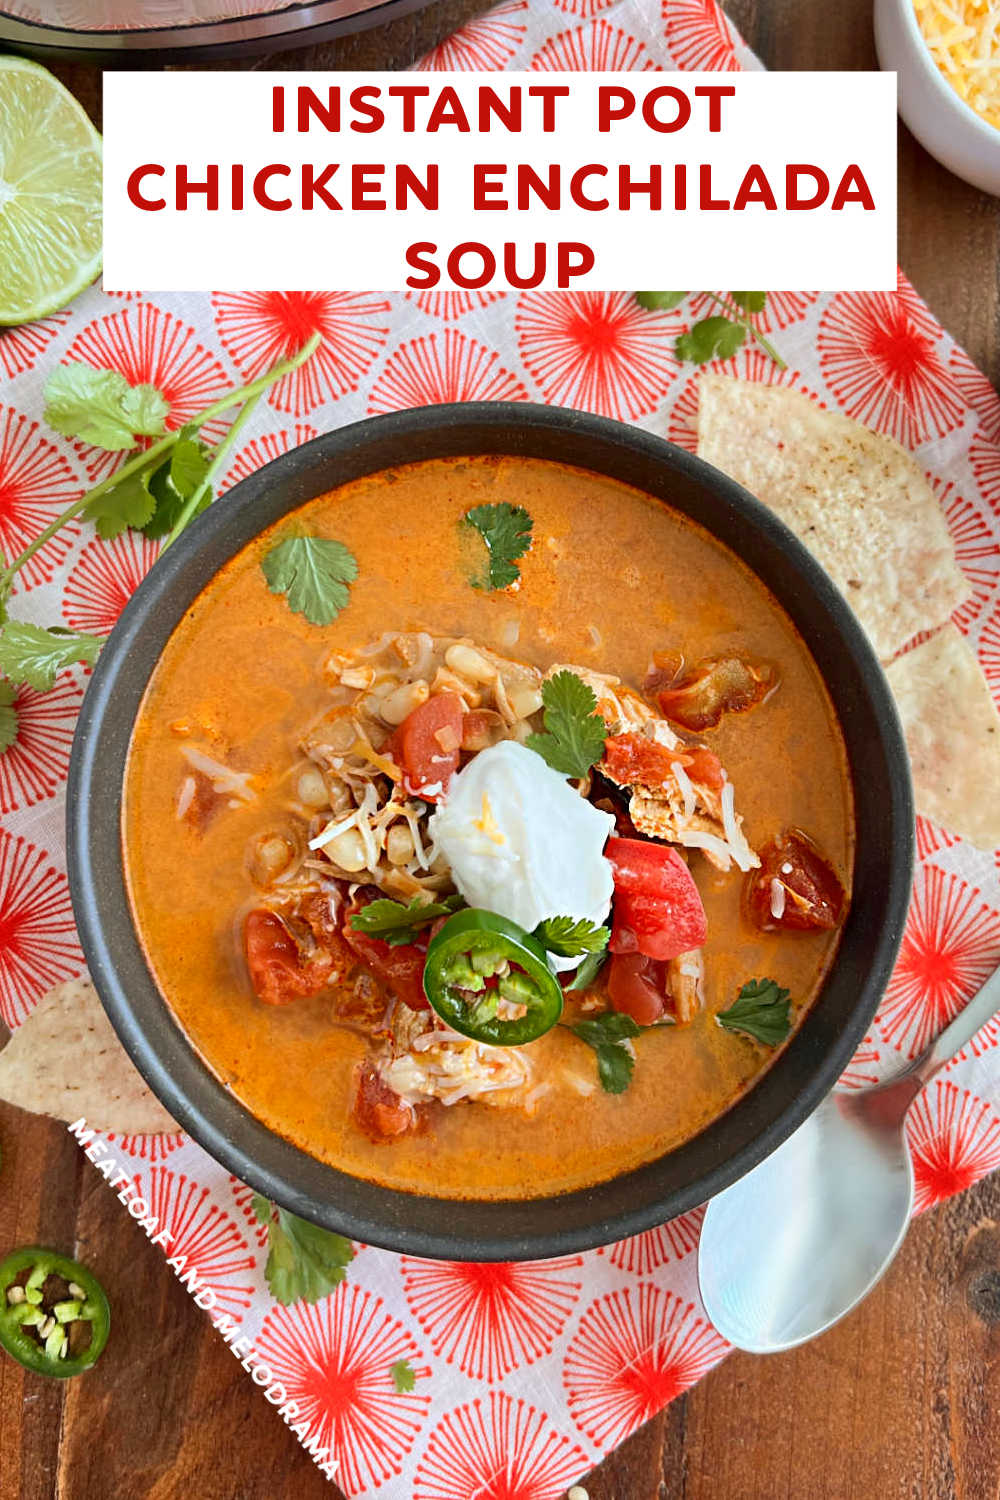 Instant Pot Chicken Enchilada Soup is made with chicken breasts, corn, green chiles and diced tomatoes in a creamy red enchilada sauce. Your whole family will love this delicious and easy chicken soup recipe made in the electric pressure cooker!  via @meamel